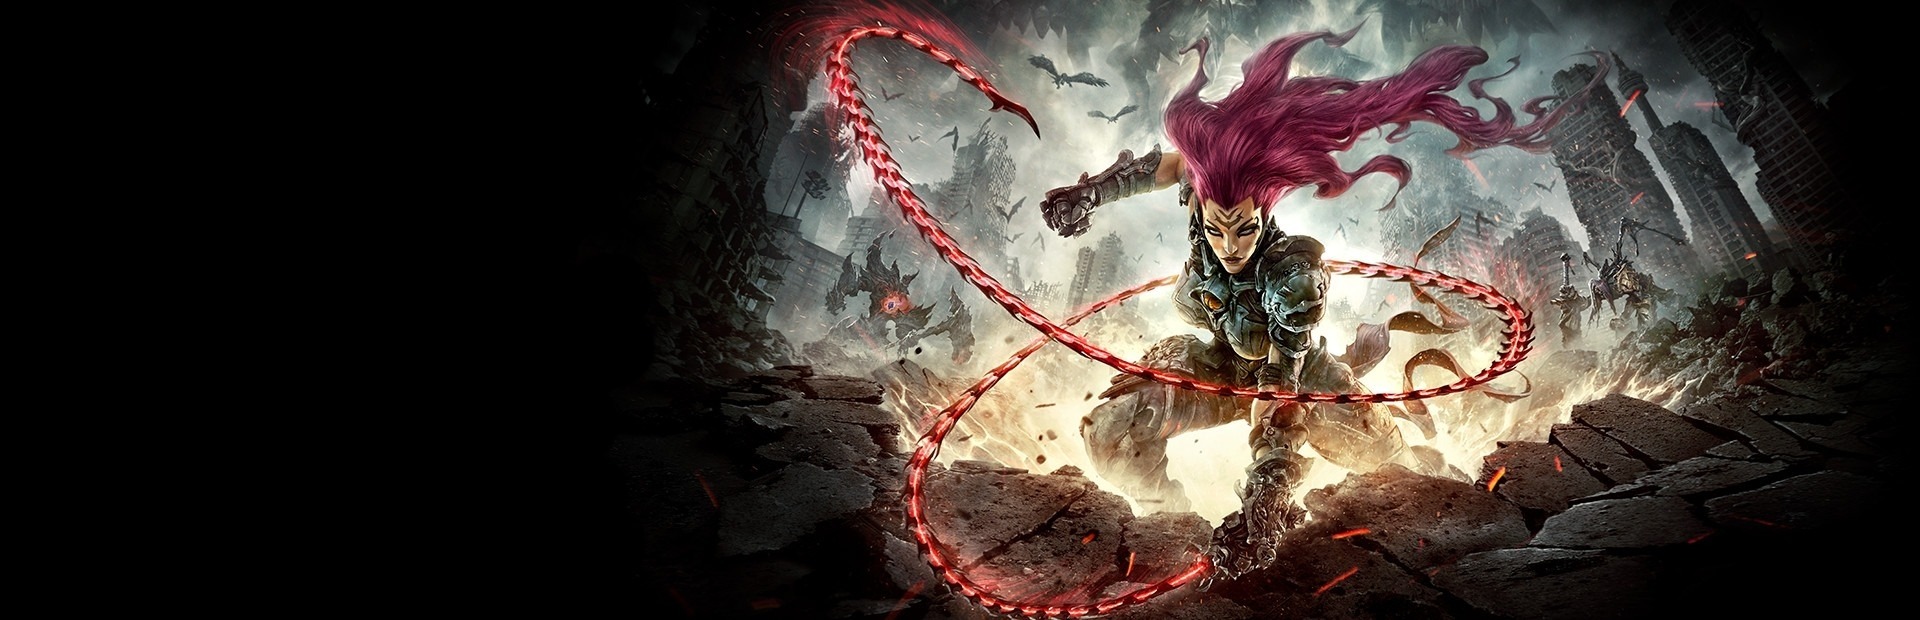 Darksiders III - Blades & Whip Edition (Xbox ONE / Xbox Series X|S)